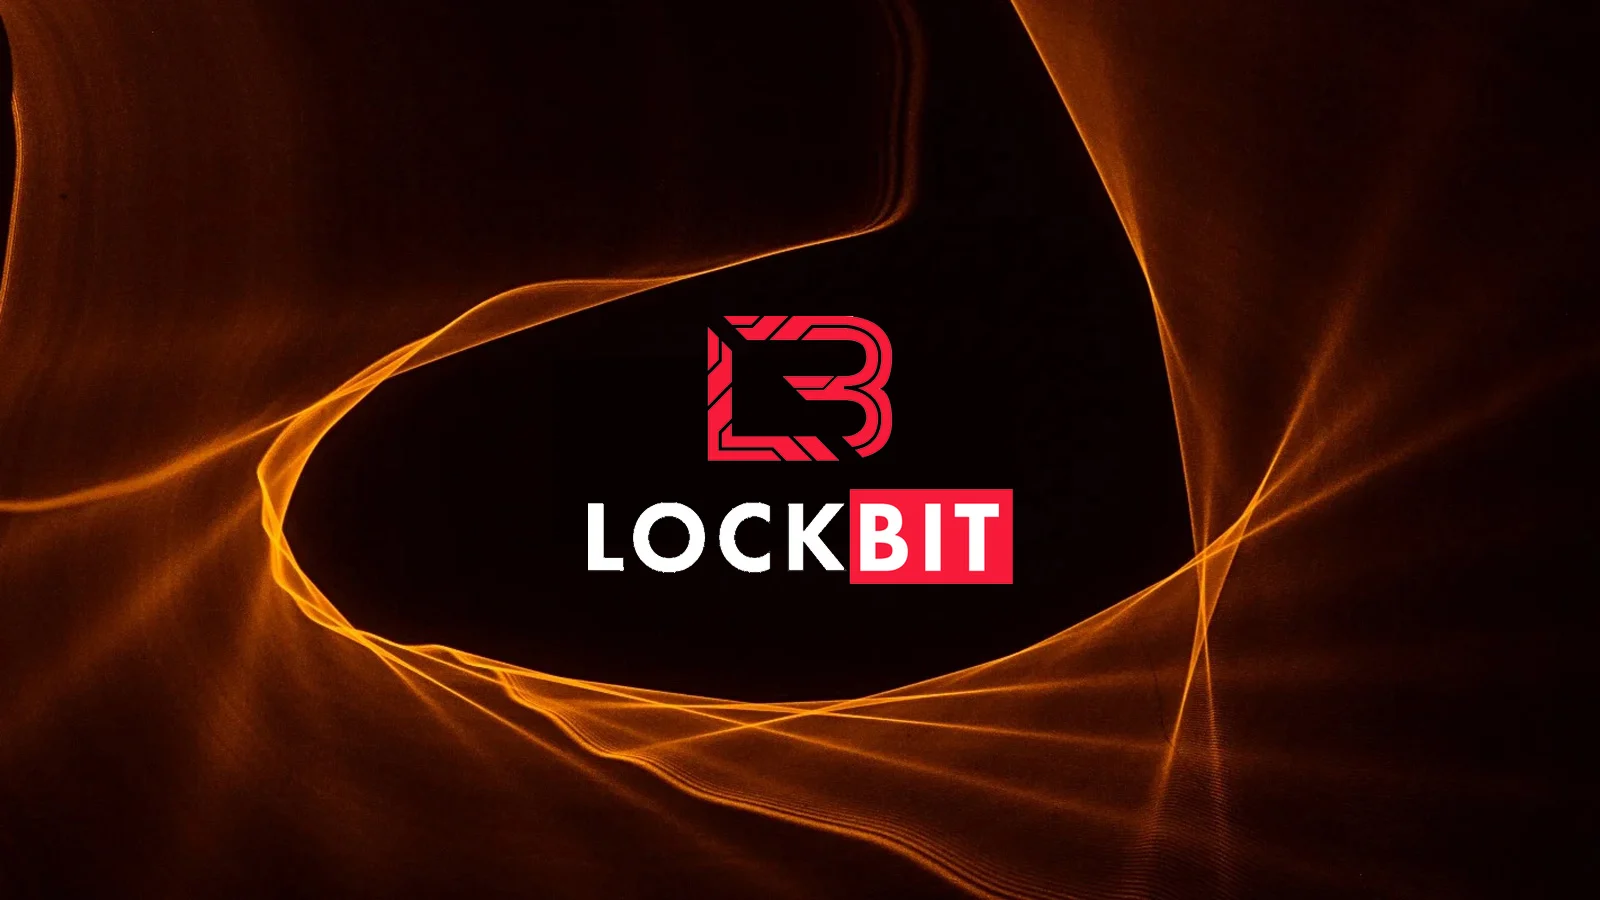 Lockbit's seized site comes alive to tease new police announcements